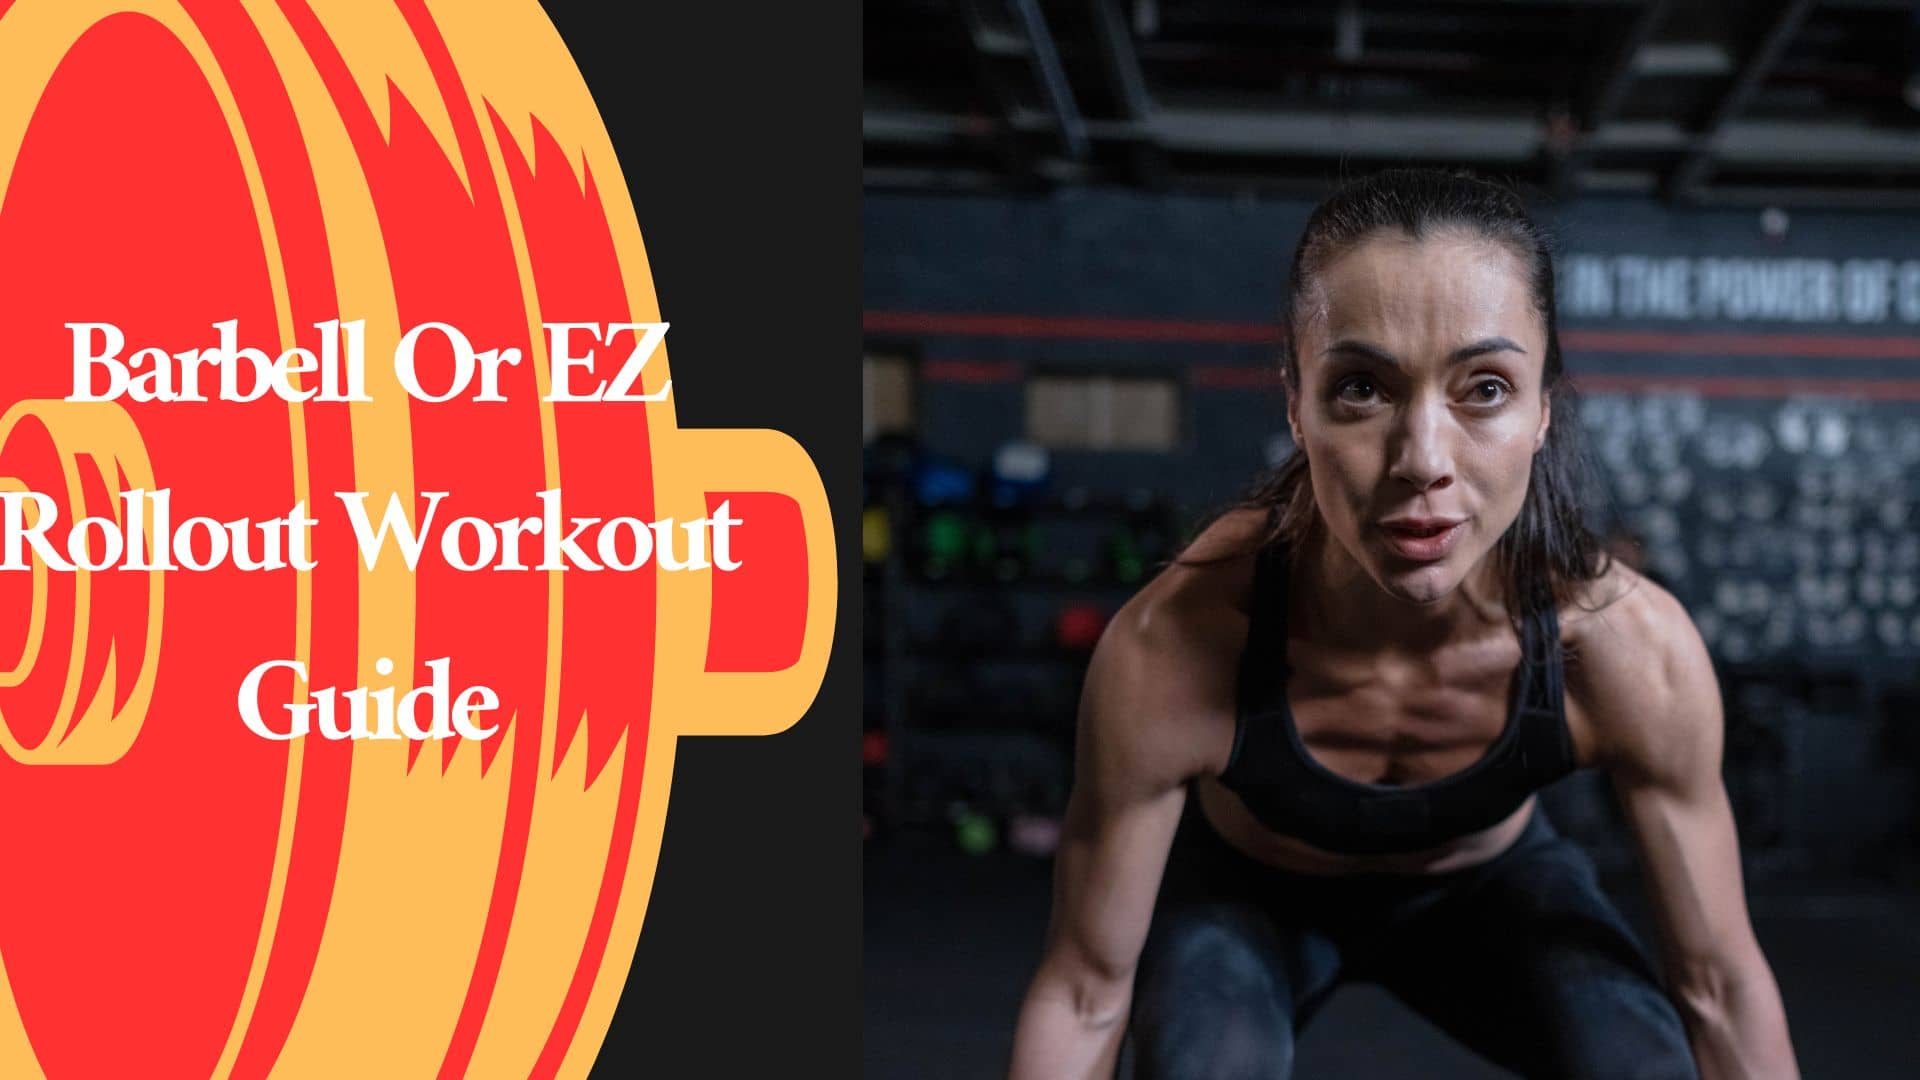 Barbell Or EZ Rollout Workout Guide